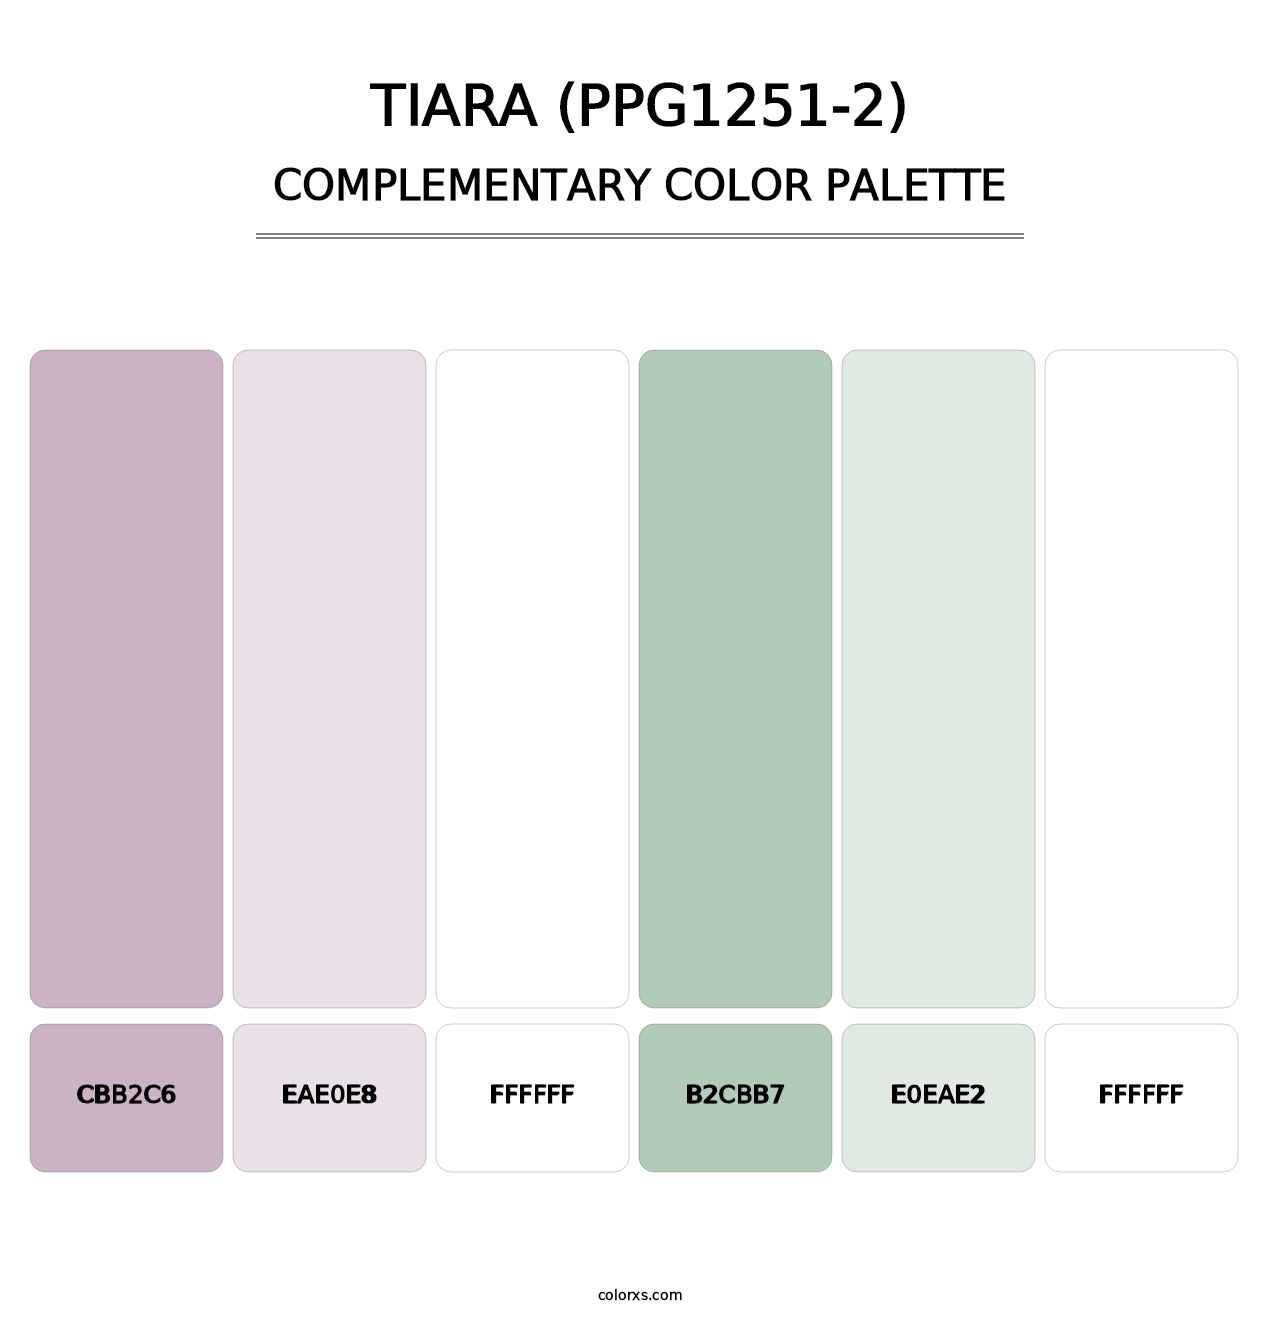 Tiara (PPG1251-2) - Complementary Color Palette